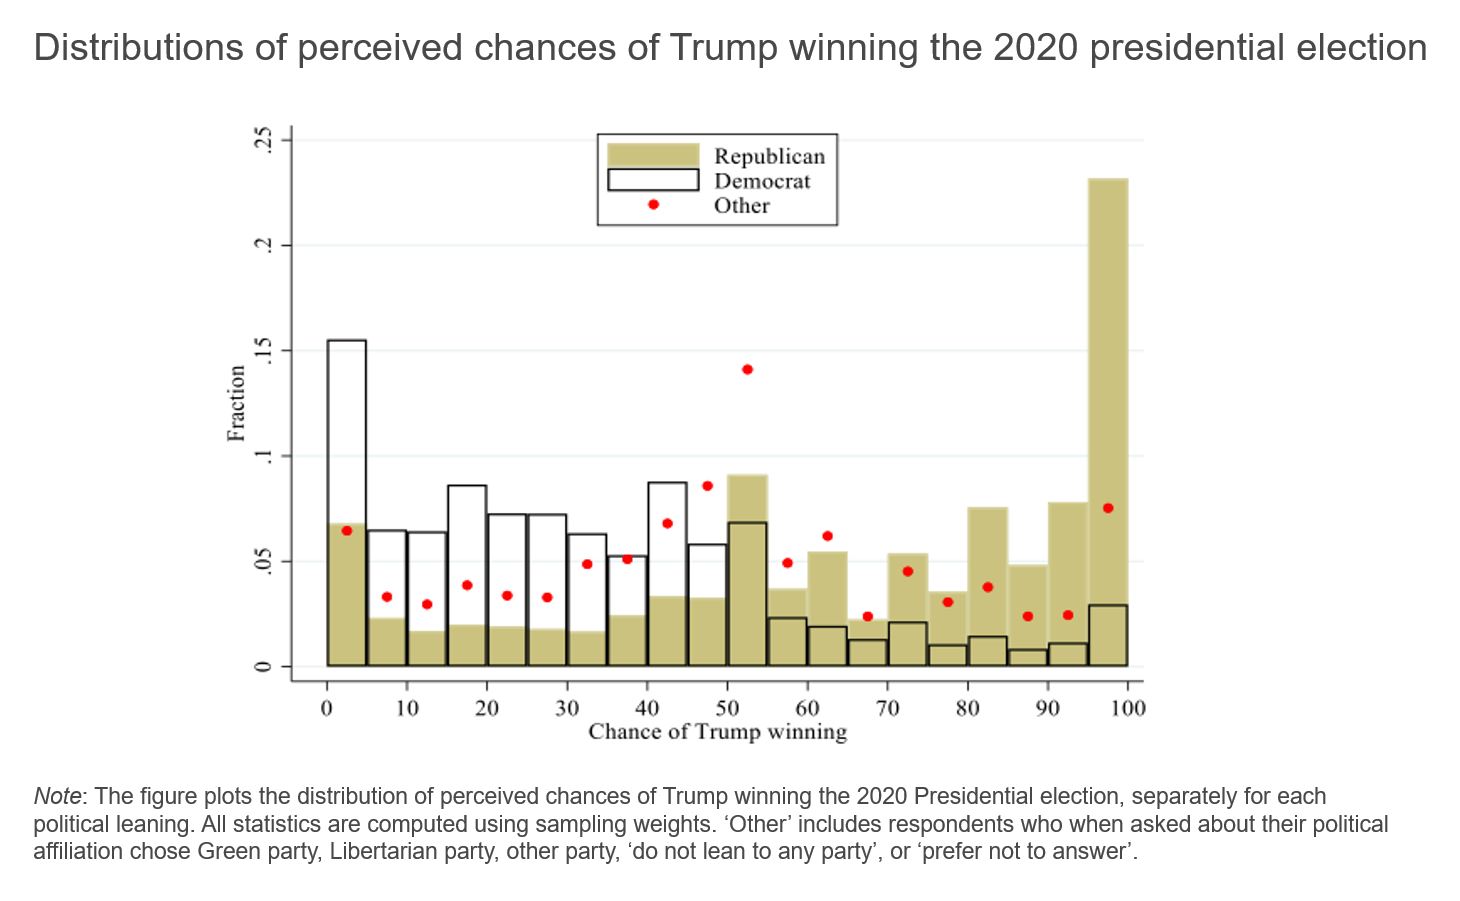 Figure showing distribution of perceived chances of Trump winning